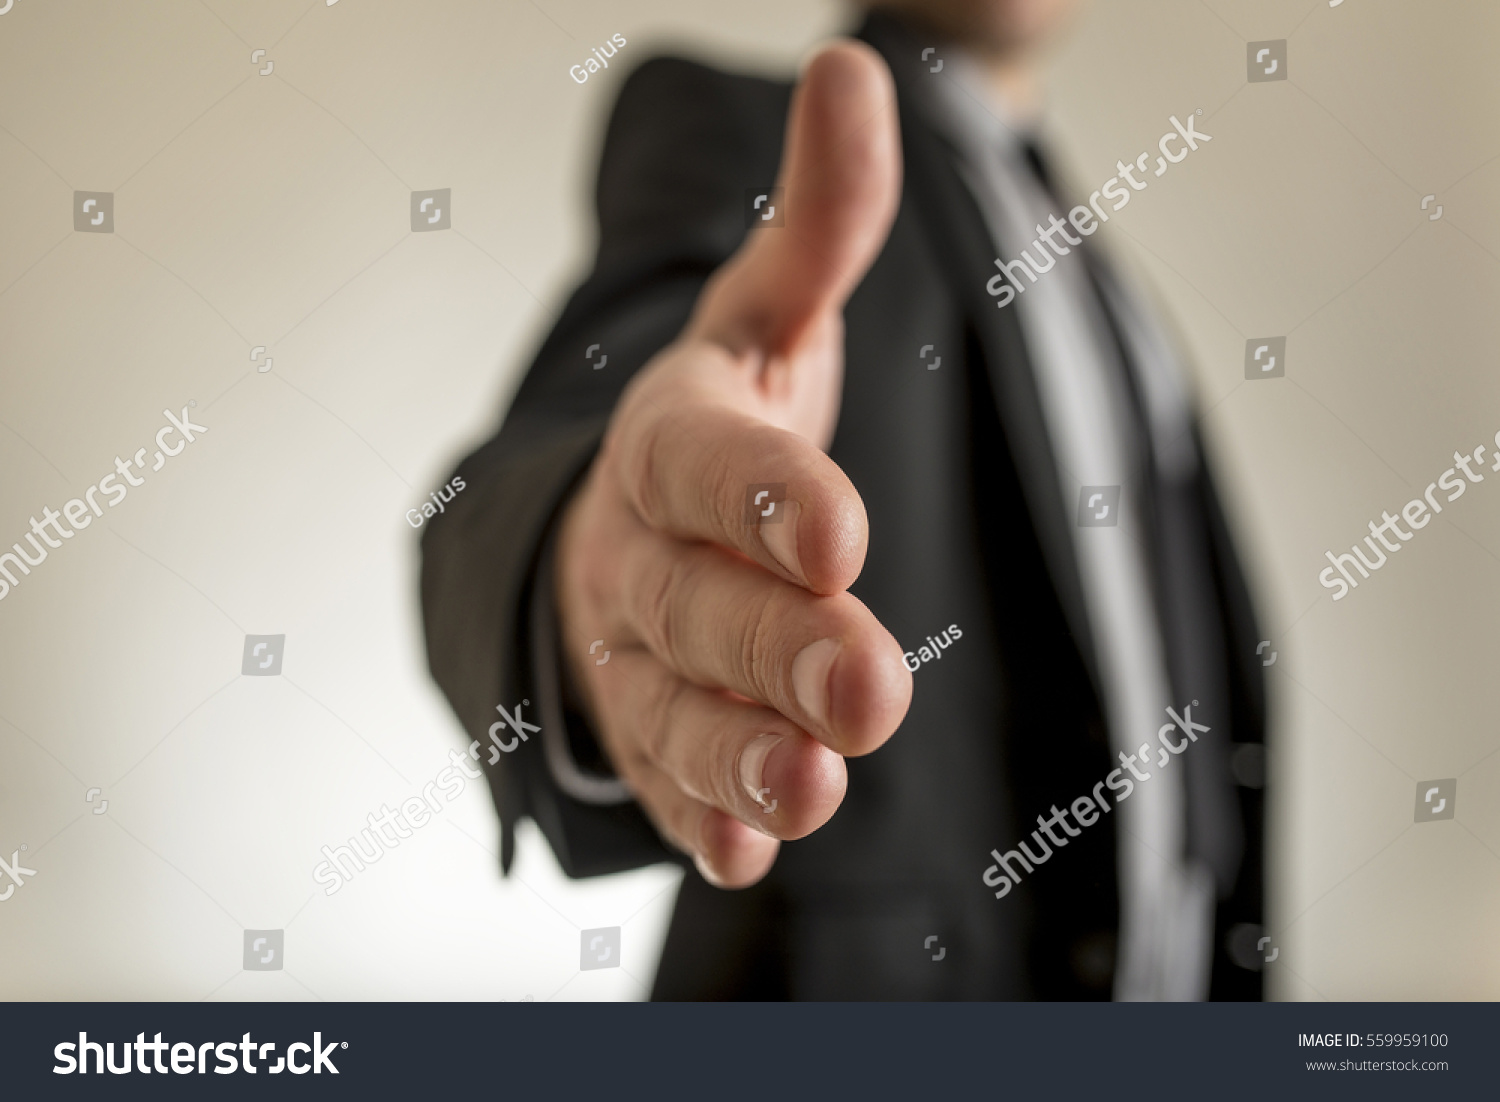 Close-up view of businessman hand reached out to handshake. Incognito man in suit blurred in background. #559959100